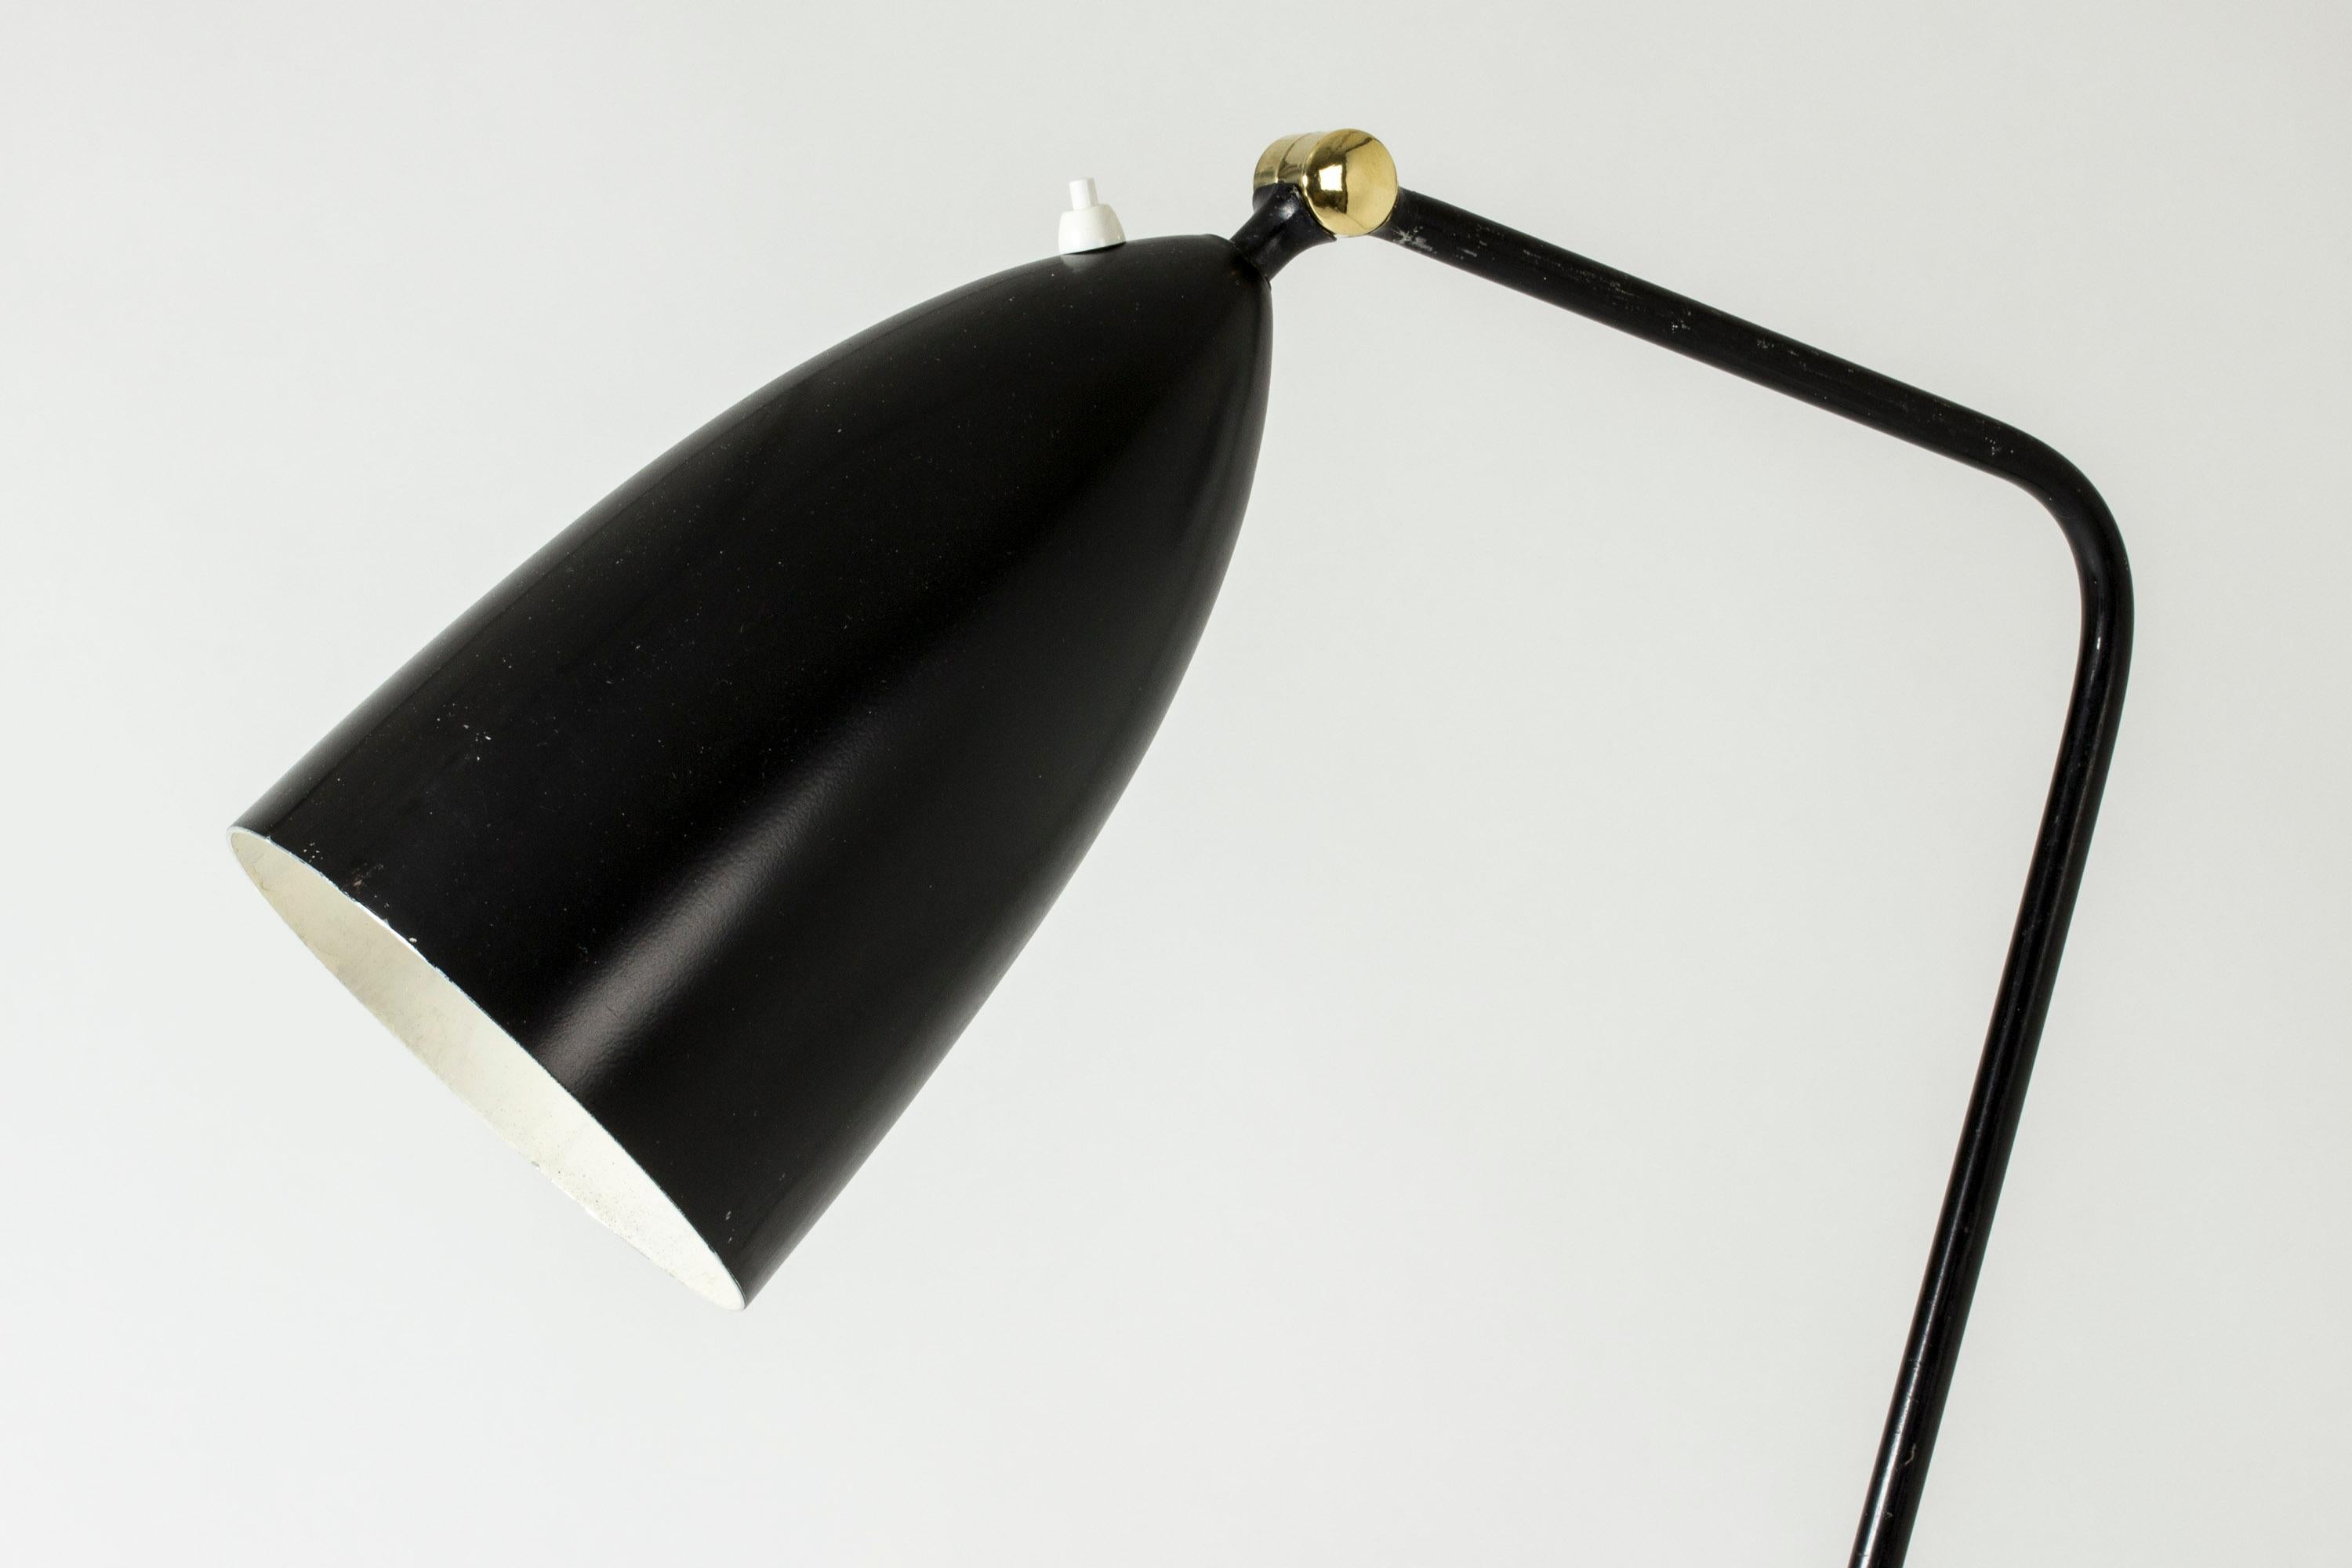 “Grasshopper” floor lamp by Greta Magnusson-Grossman. Made from lacquered metal with amazing lines and proportions. Original black lacquer.